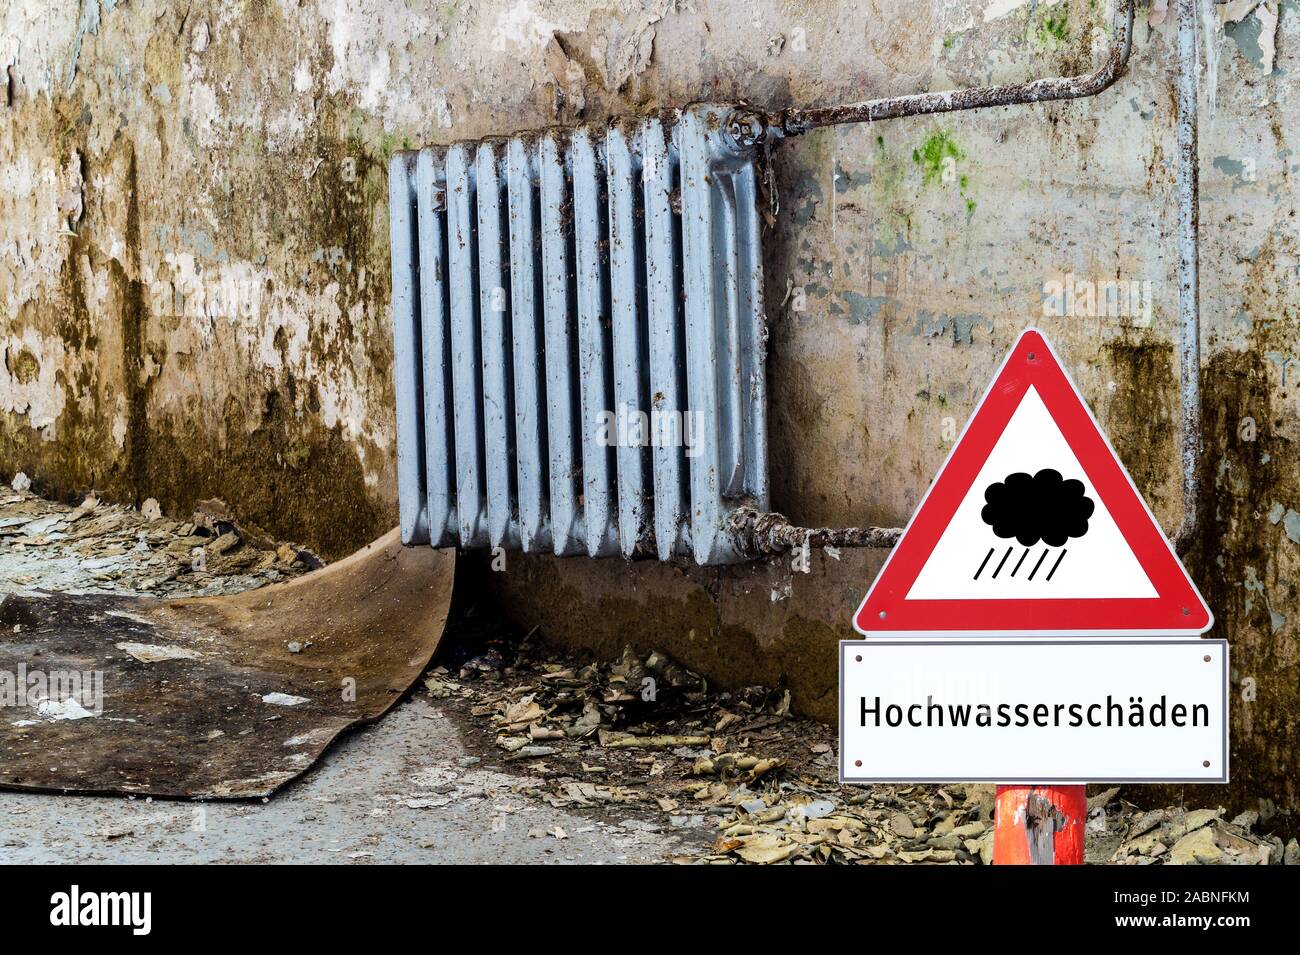 Attention sign flood damage in german Stock Photo